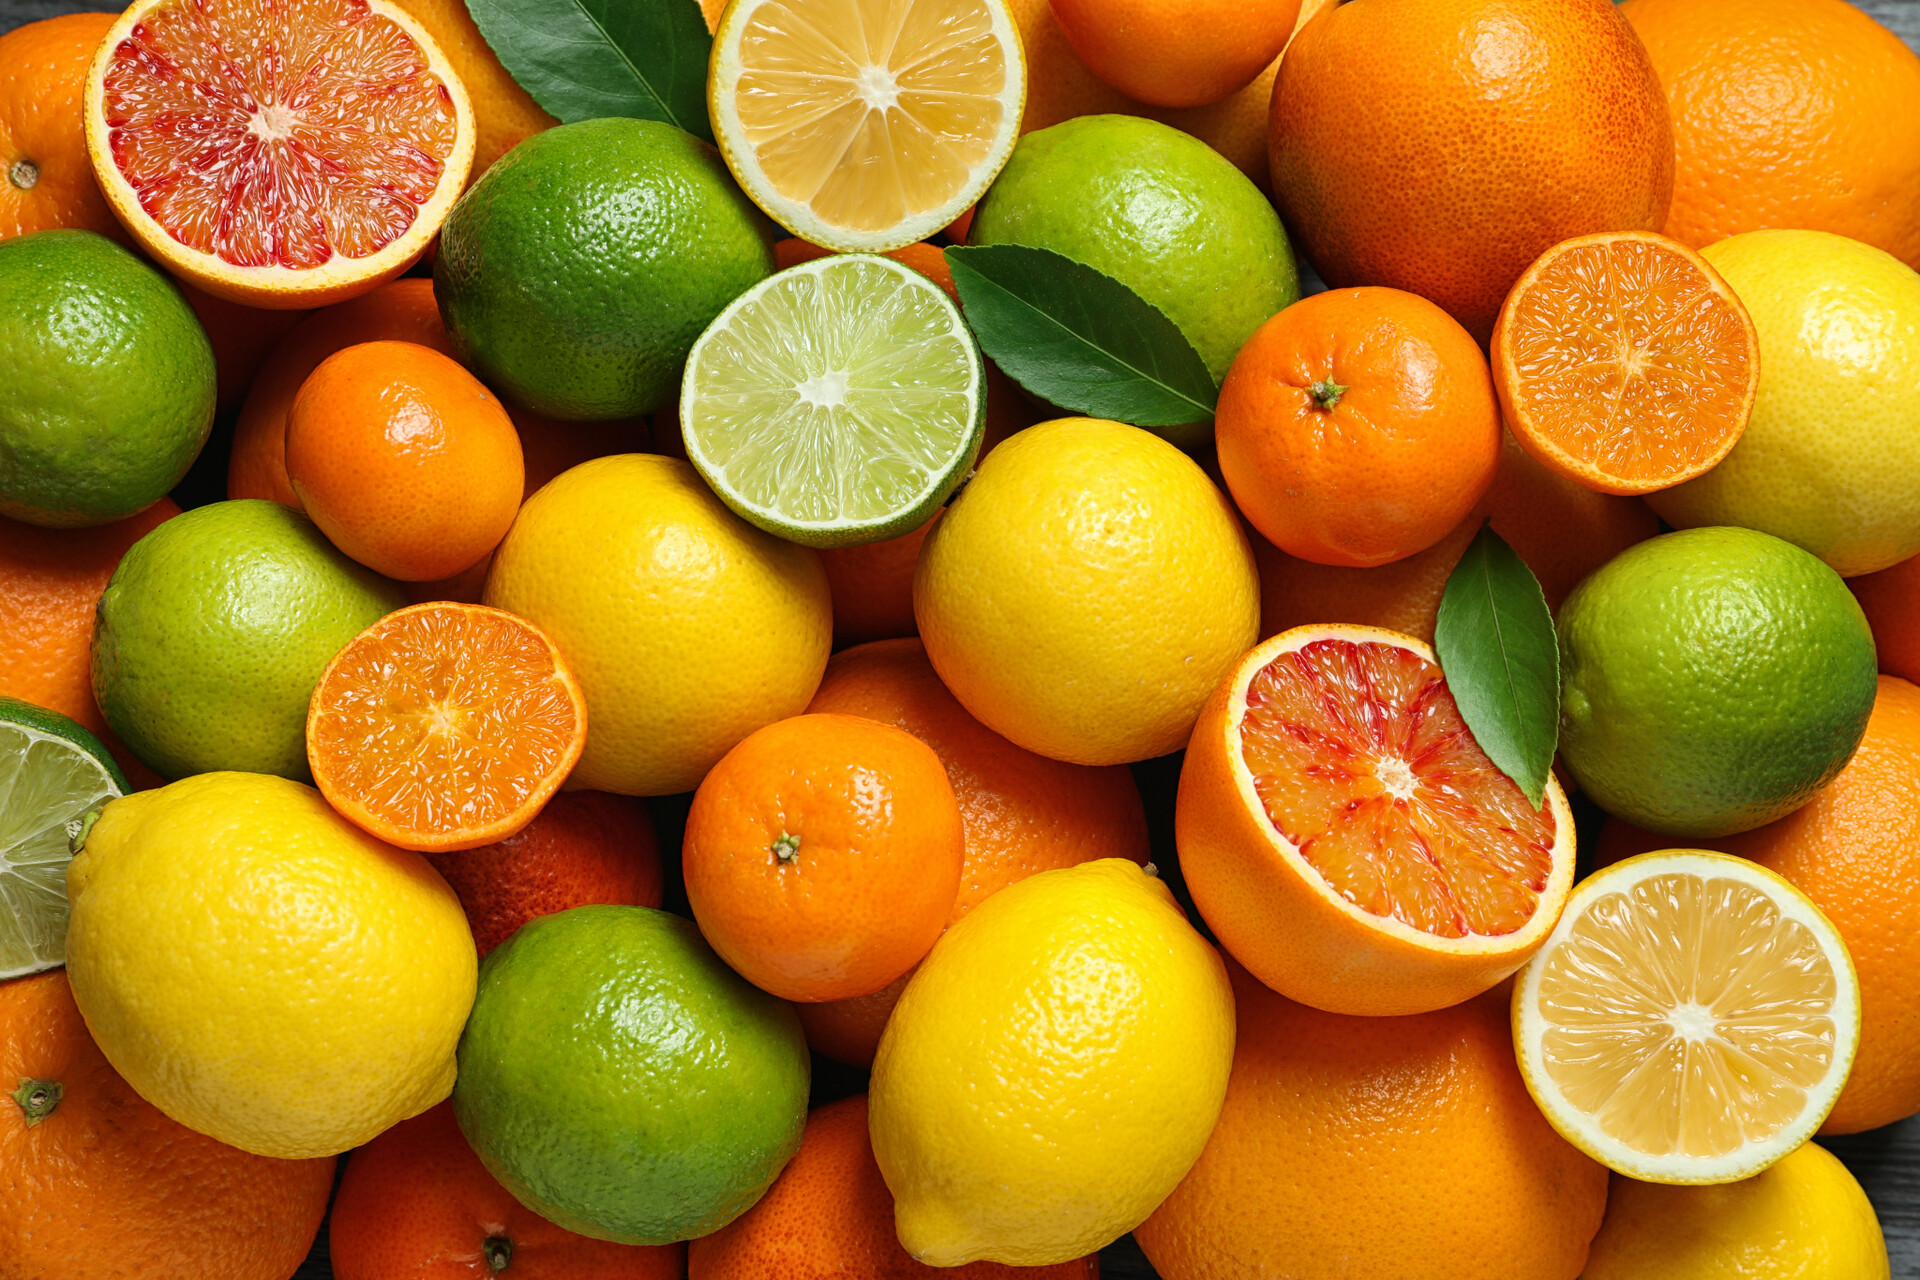 Many different citrus fruits all in a pile together.